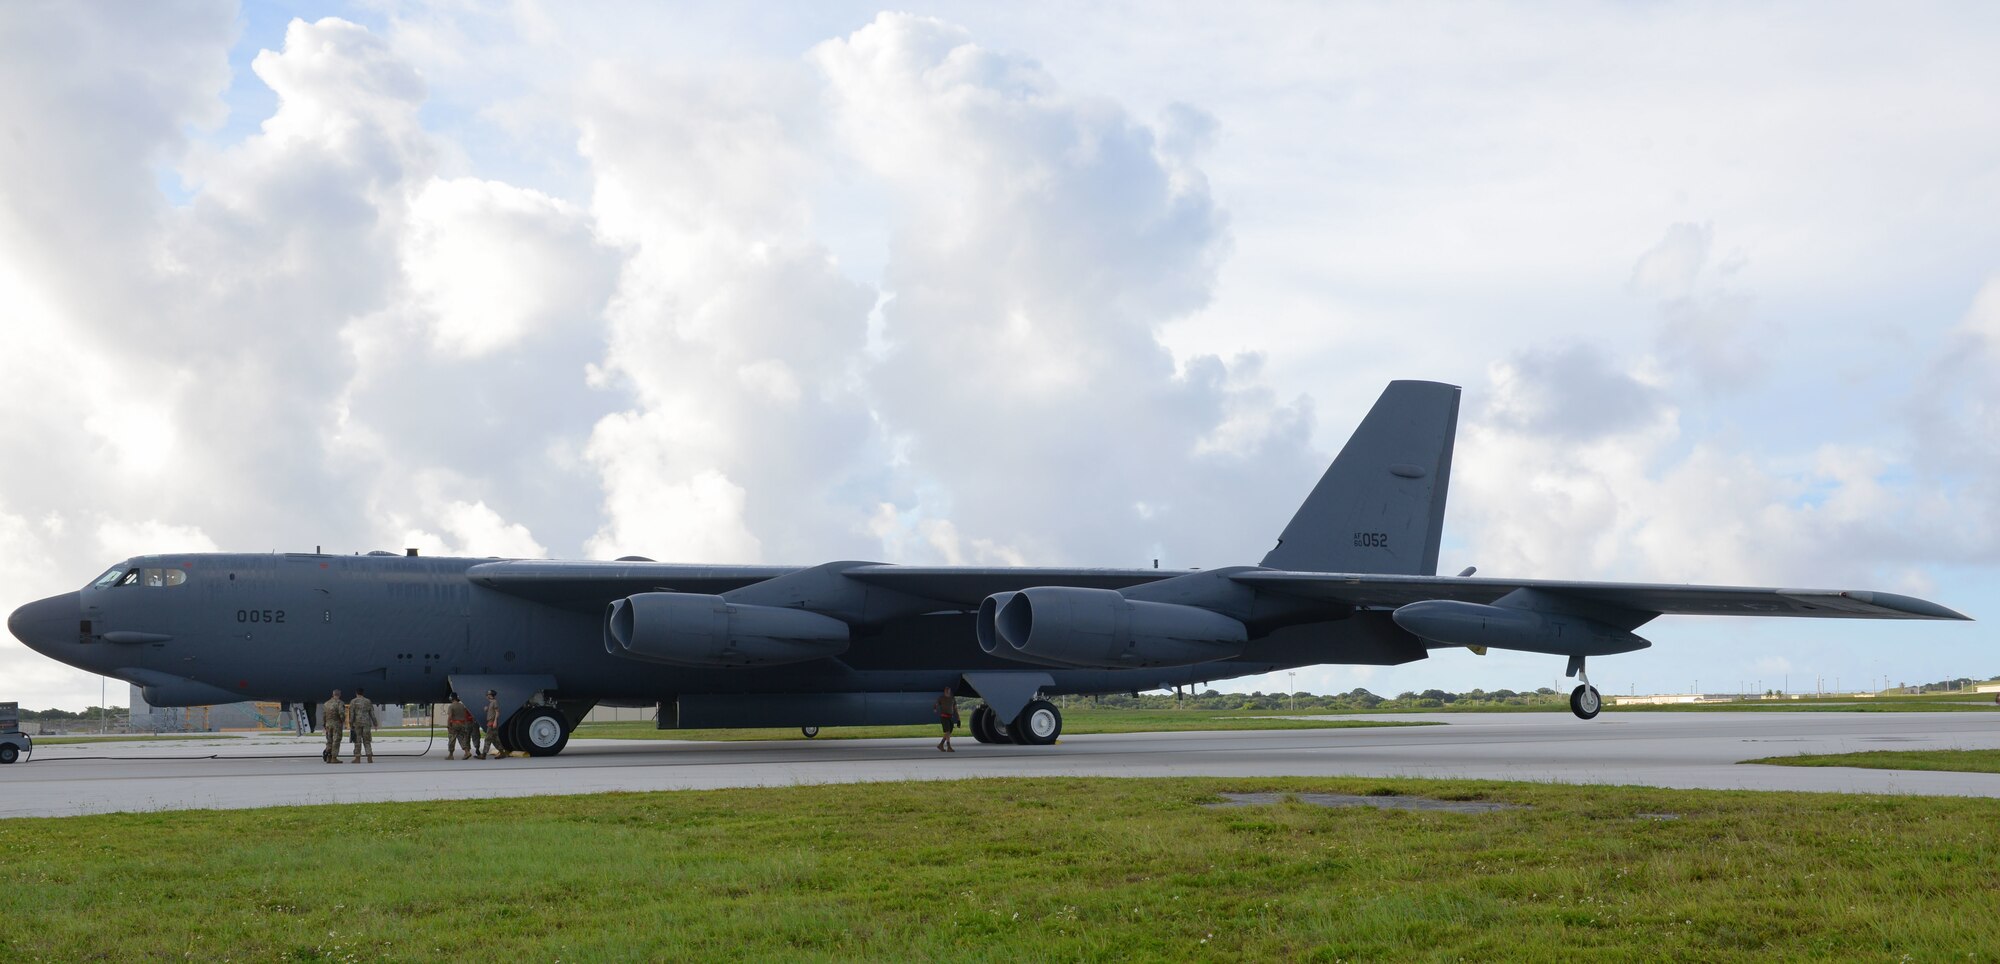 A U.S. Air Force B-52H Stratofortress bomber, deployed from Barksdale Air Force Base, La. lands at Andersen Air Base, Guam, July 4, 2020. The B-52 flew the 28-hour mission to demonstrate U.S. Indo-Pacific Command’s commitment to the security and stability of the Indo-Pacific region. (U.S. Air Force photo by Staff Sgt. Nicholas Crisp)